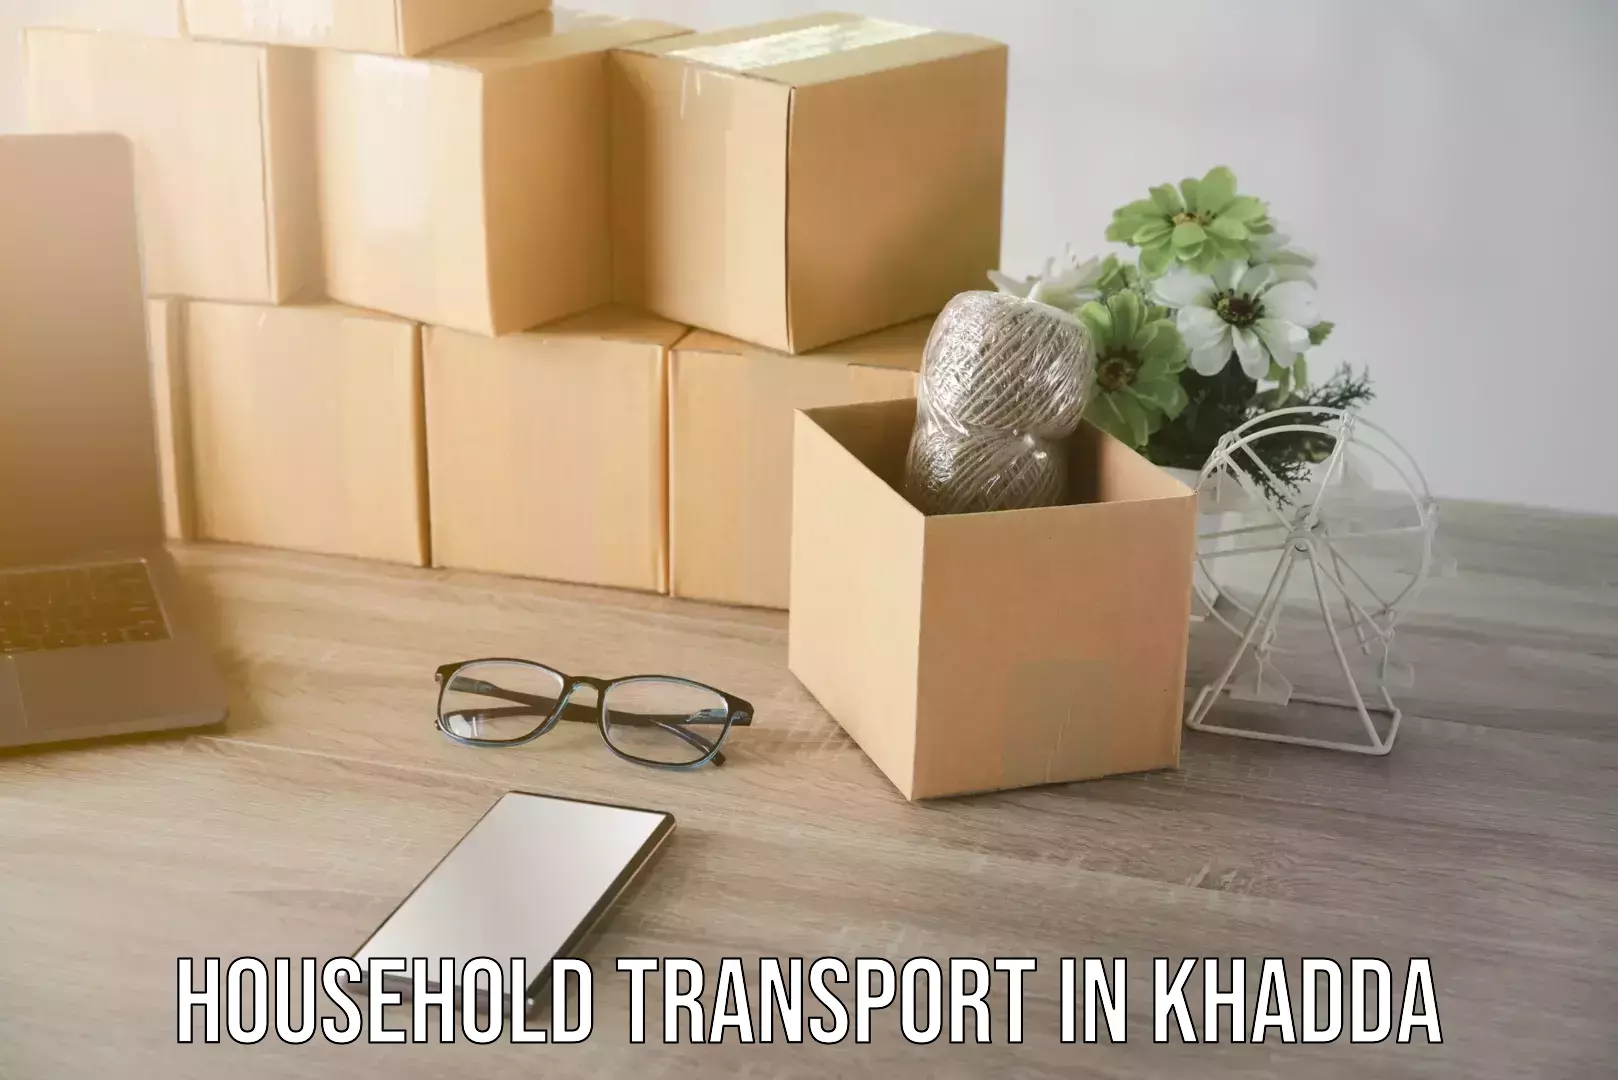 Reliable moving assistance in Khadda